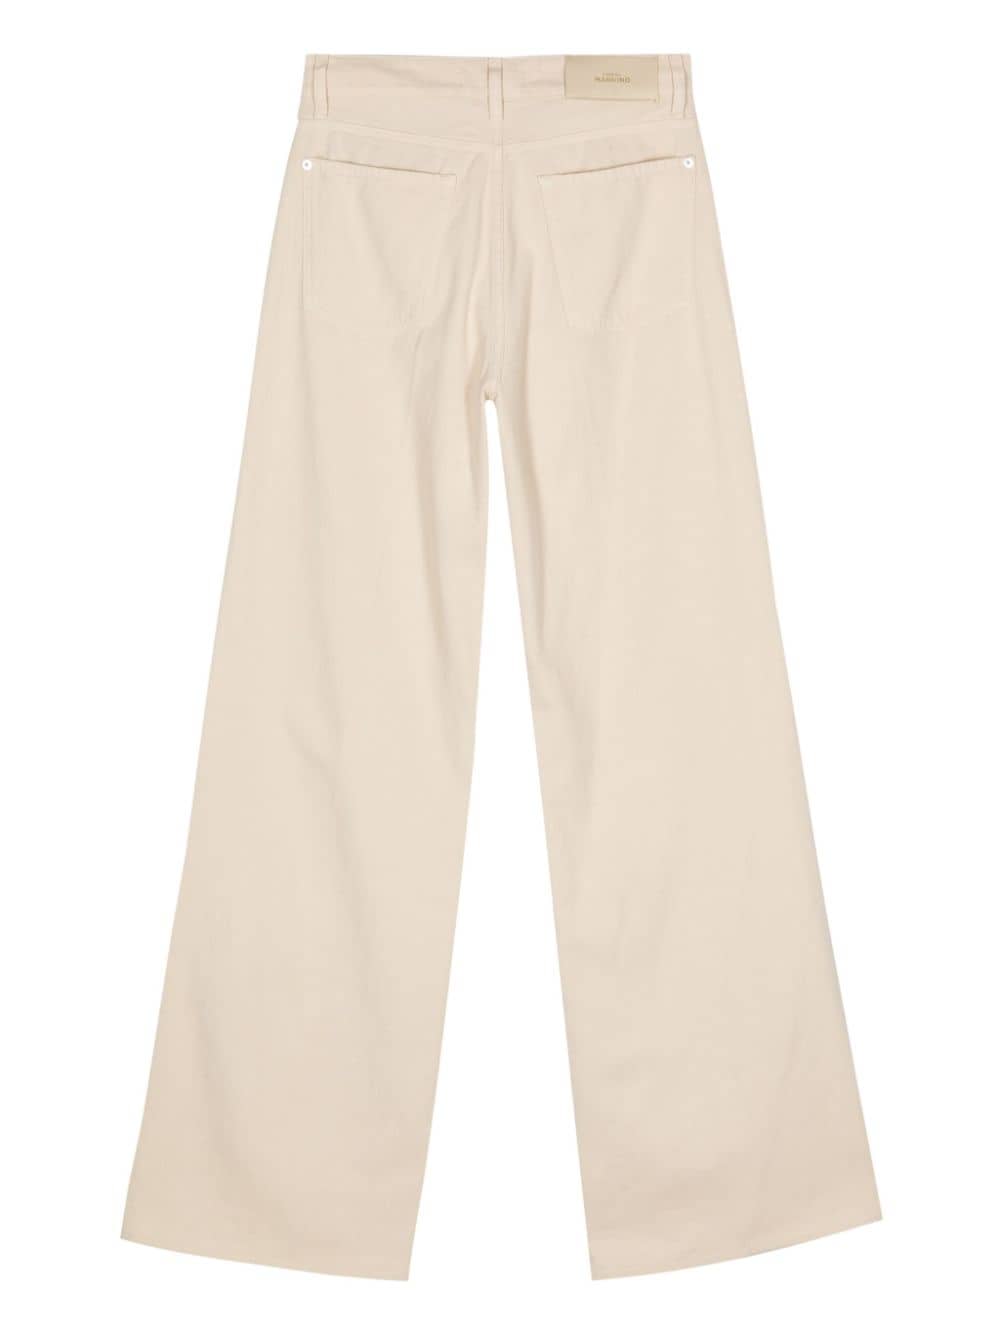 7 For All Mankind 7 FOR ALL MANKIND- Lotta Wide-leg Linen Jeans